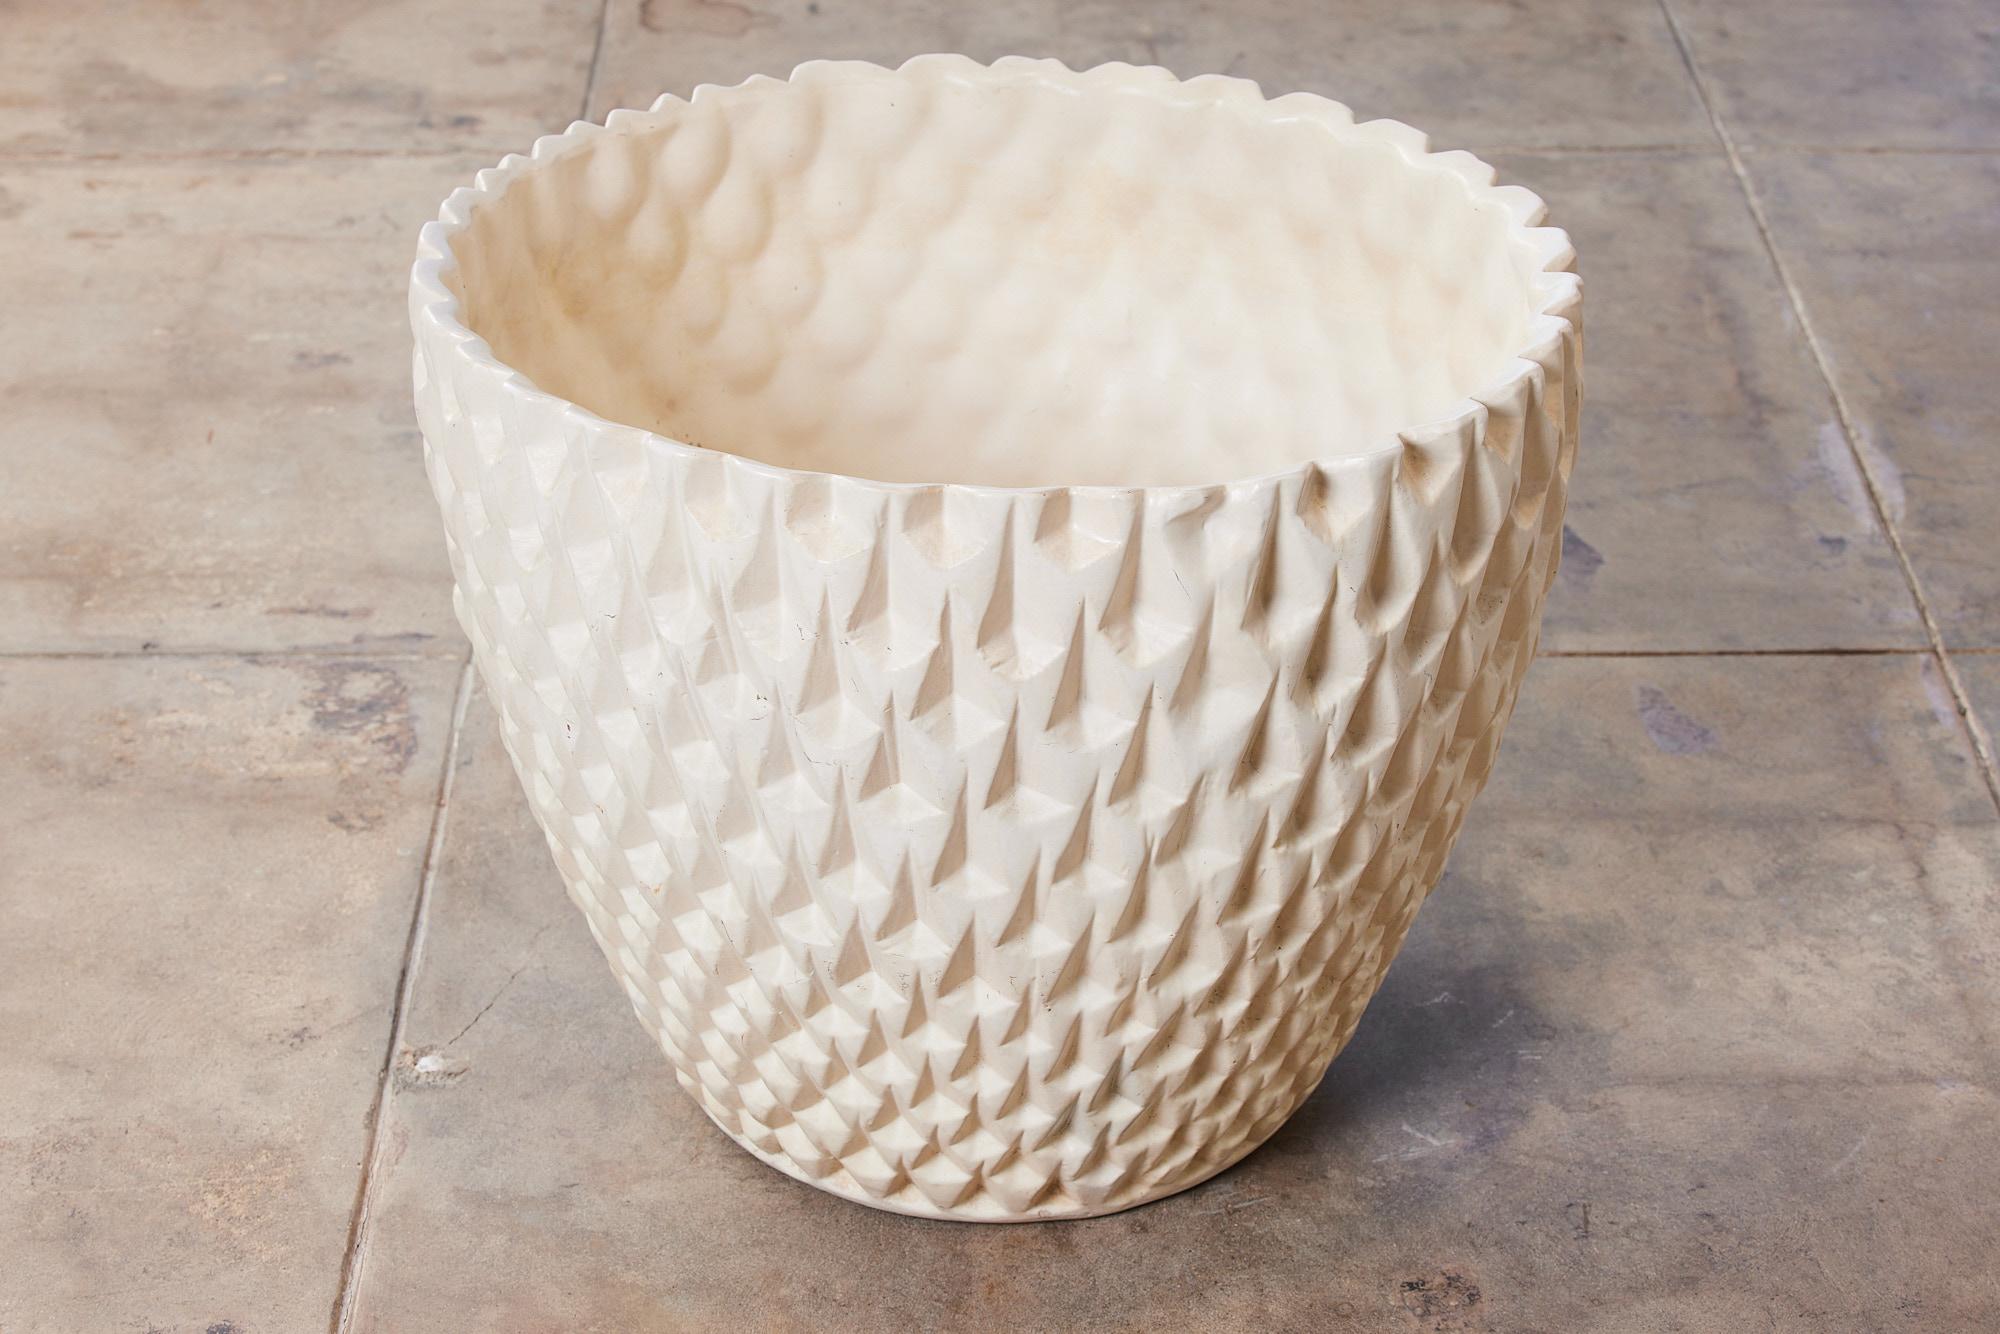 David Cressey Phoenix-1 Planter in White Glaze for Architectural Pottery In Excellent Condition For Sale In Los Angeles, CA